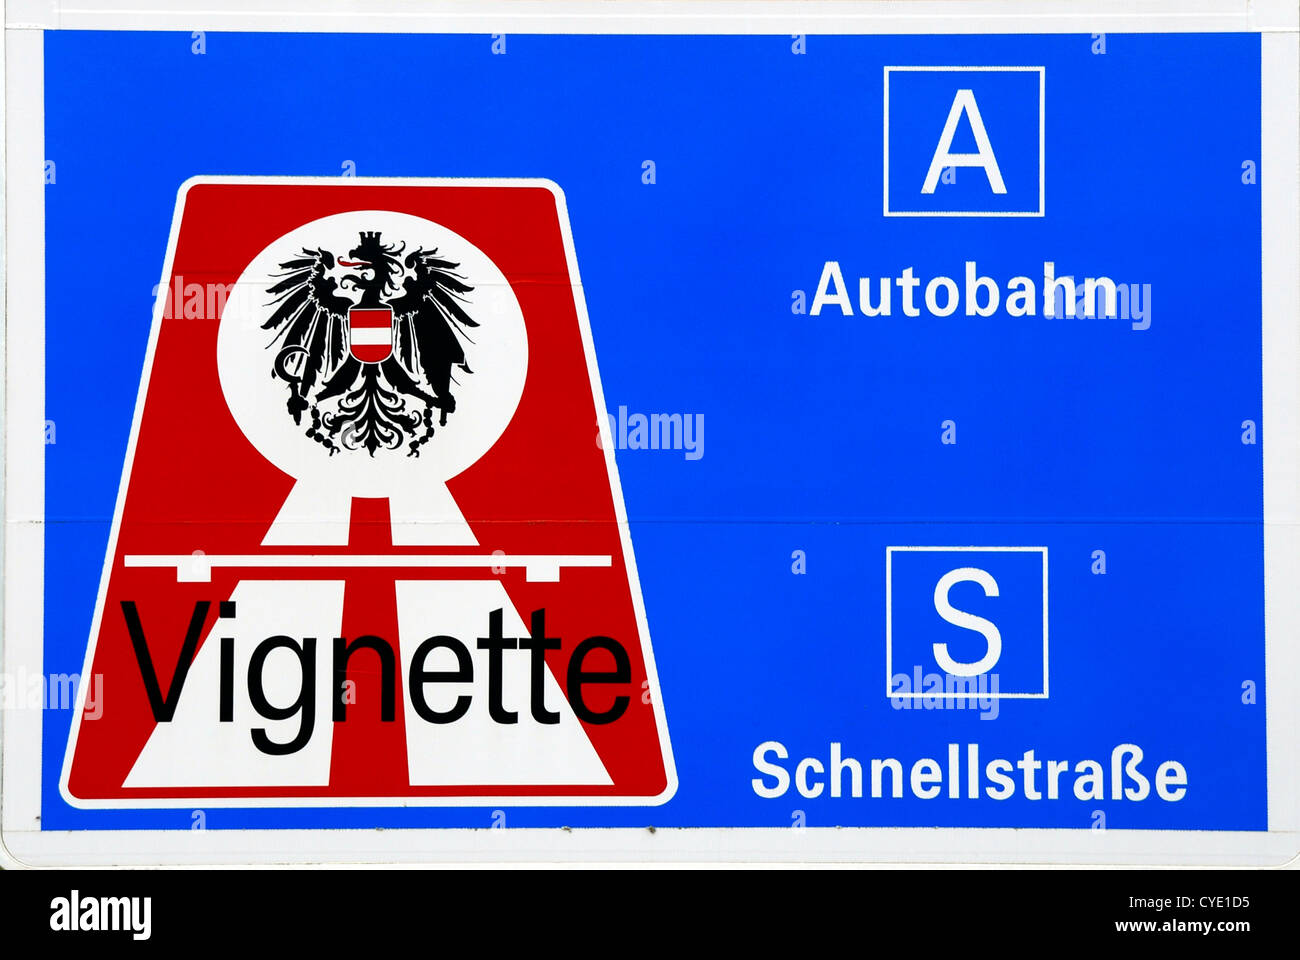 Sign post with reference to the vignette duty on motorways in Austria. Stock Photo